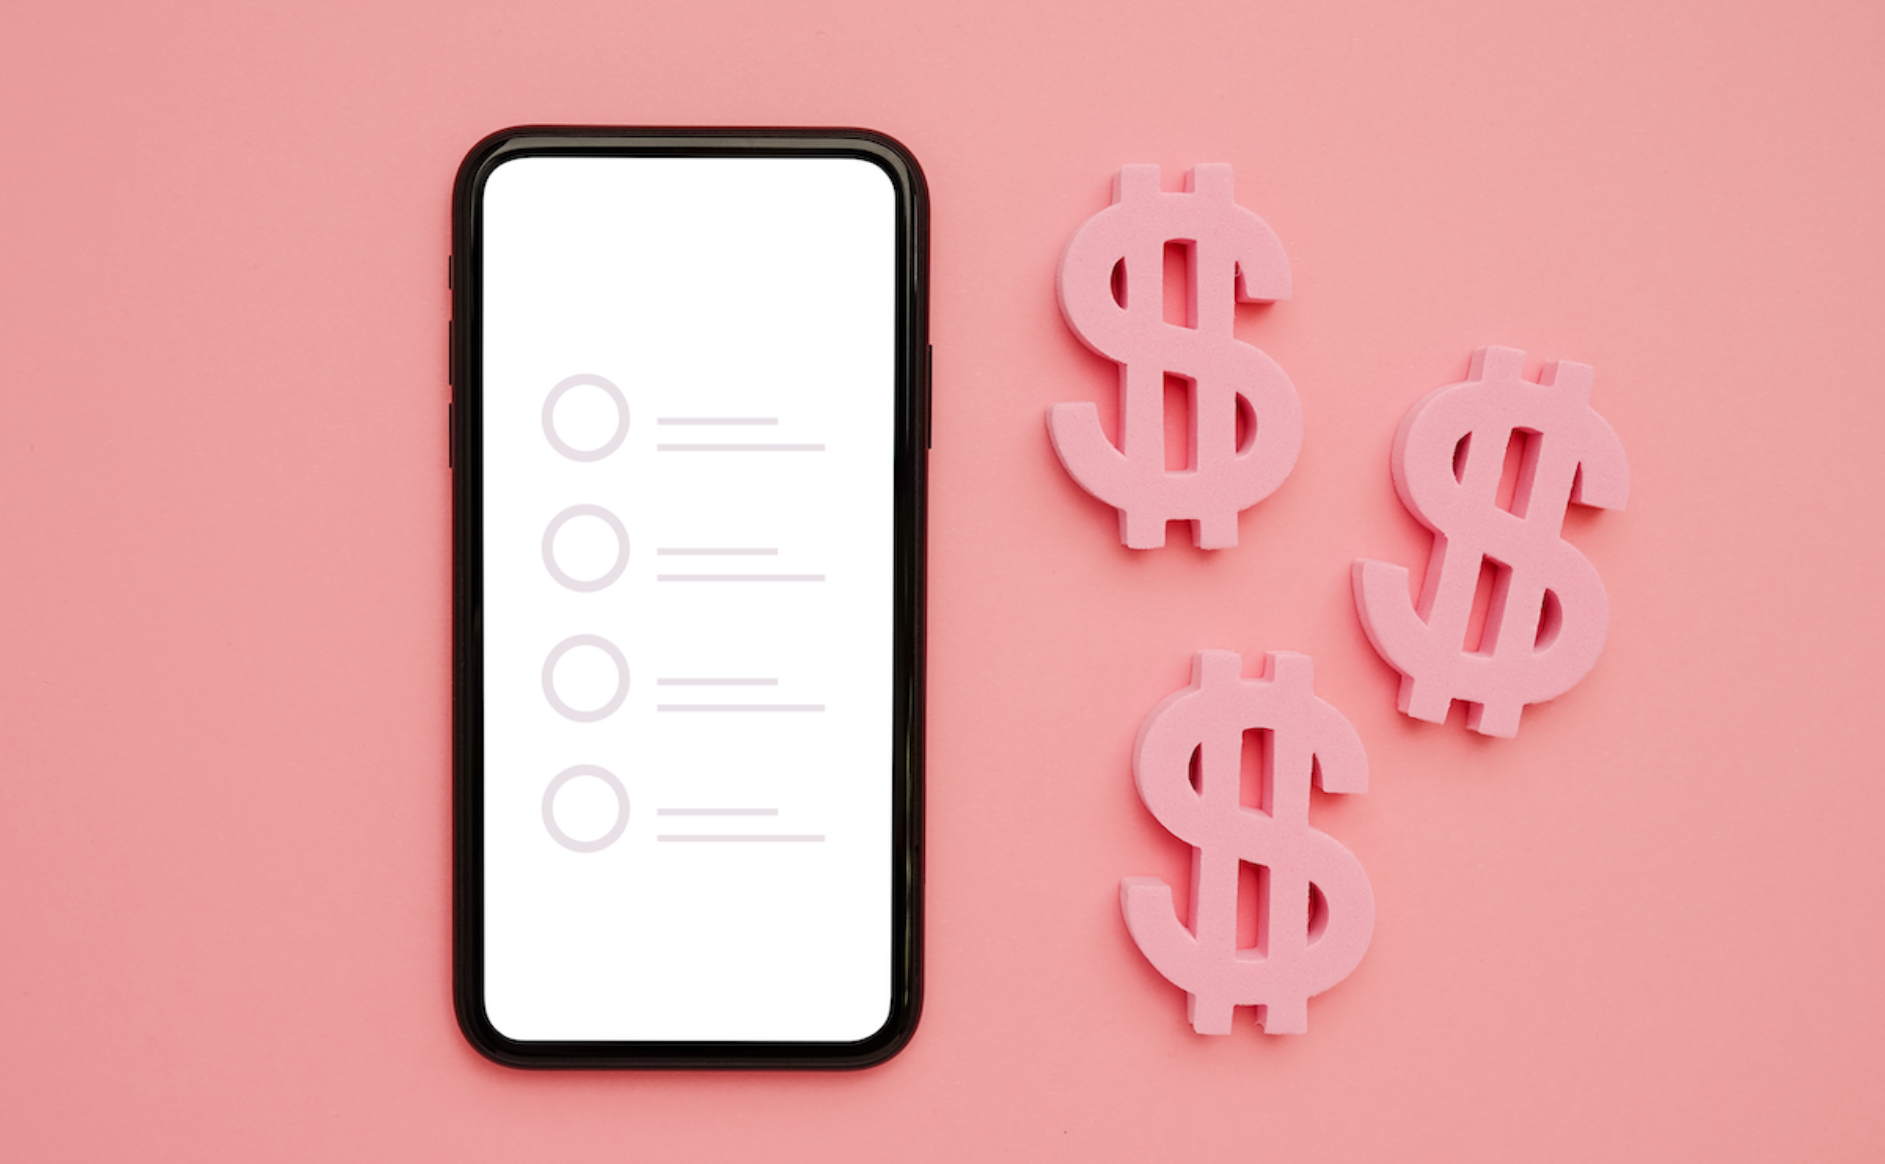 survey on mobile phone on pink background surrounded by American dollar symbols